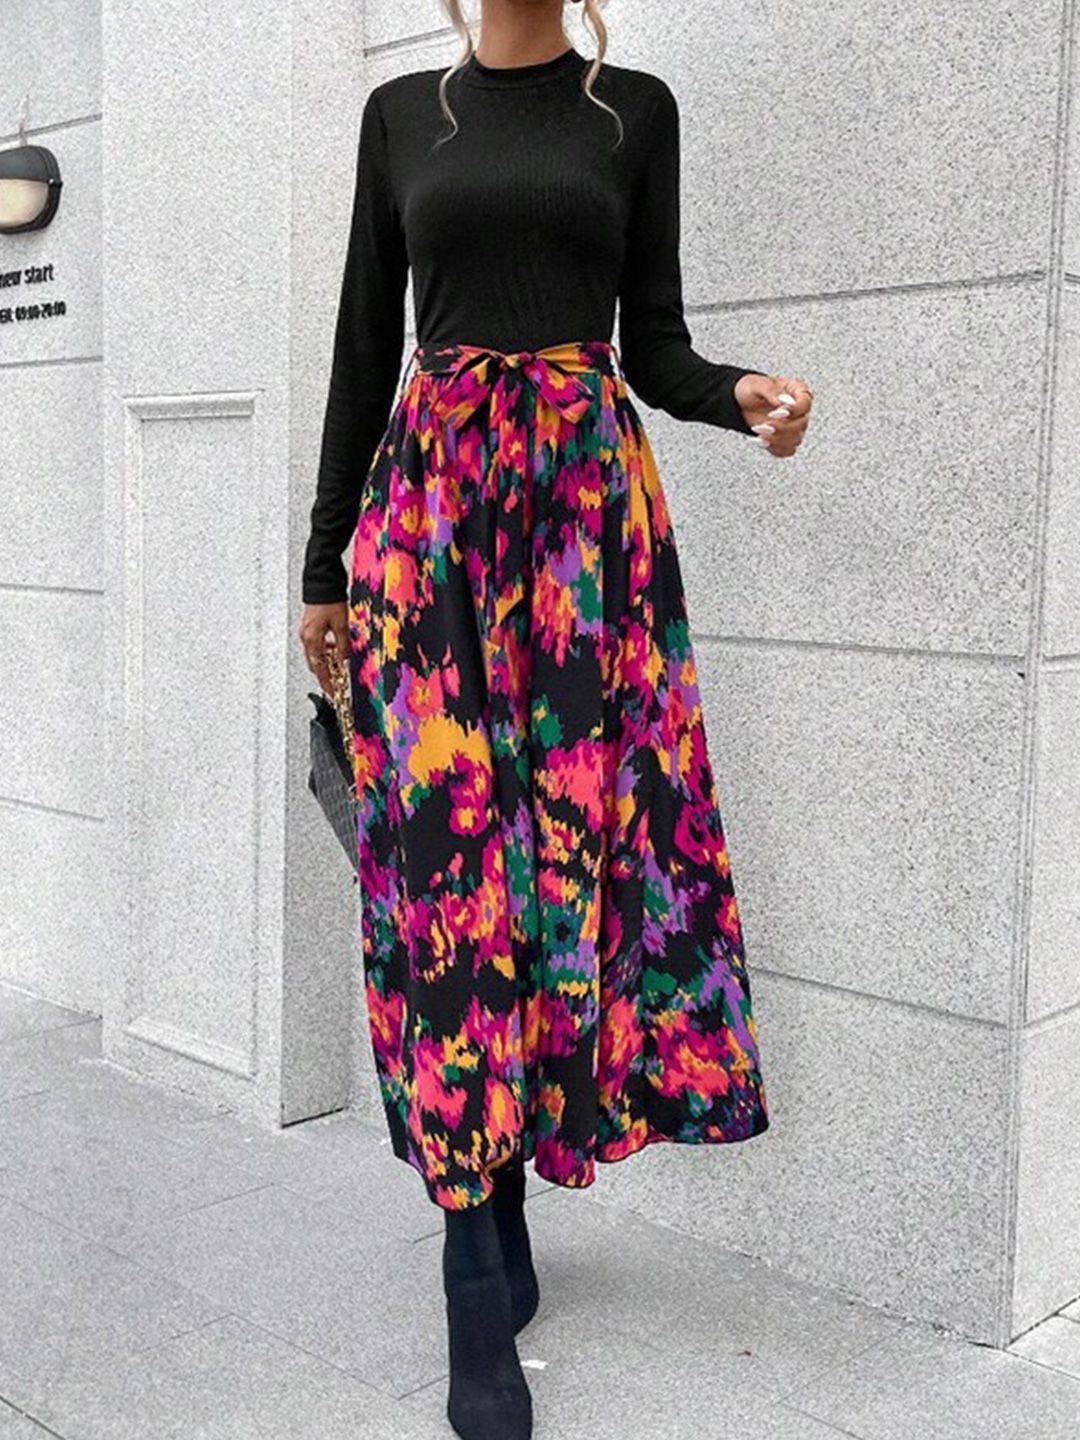 stylecast black & pink abstract printed tie-up detail maxi fit & flare dress